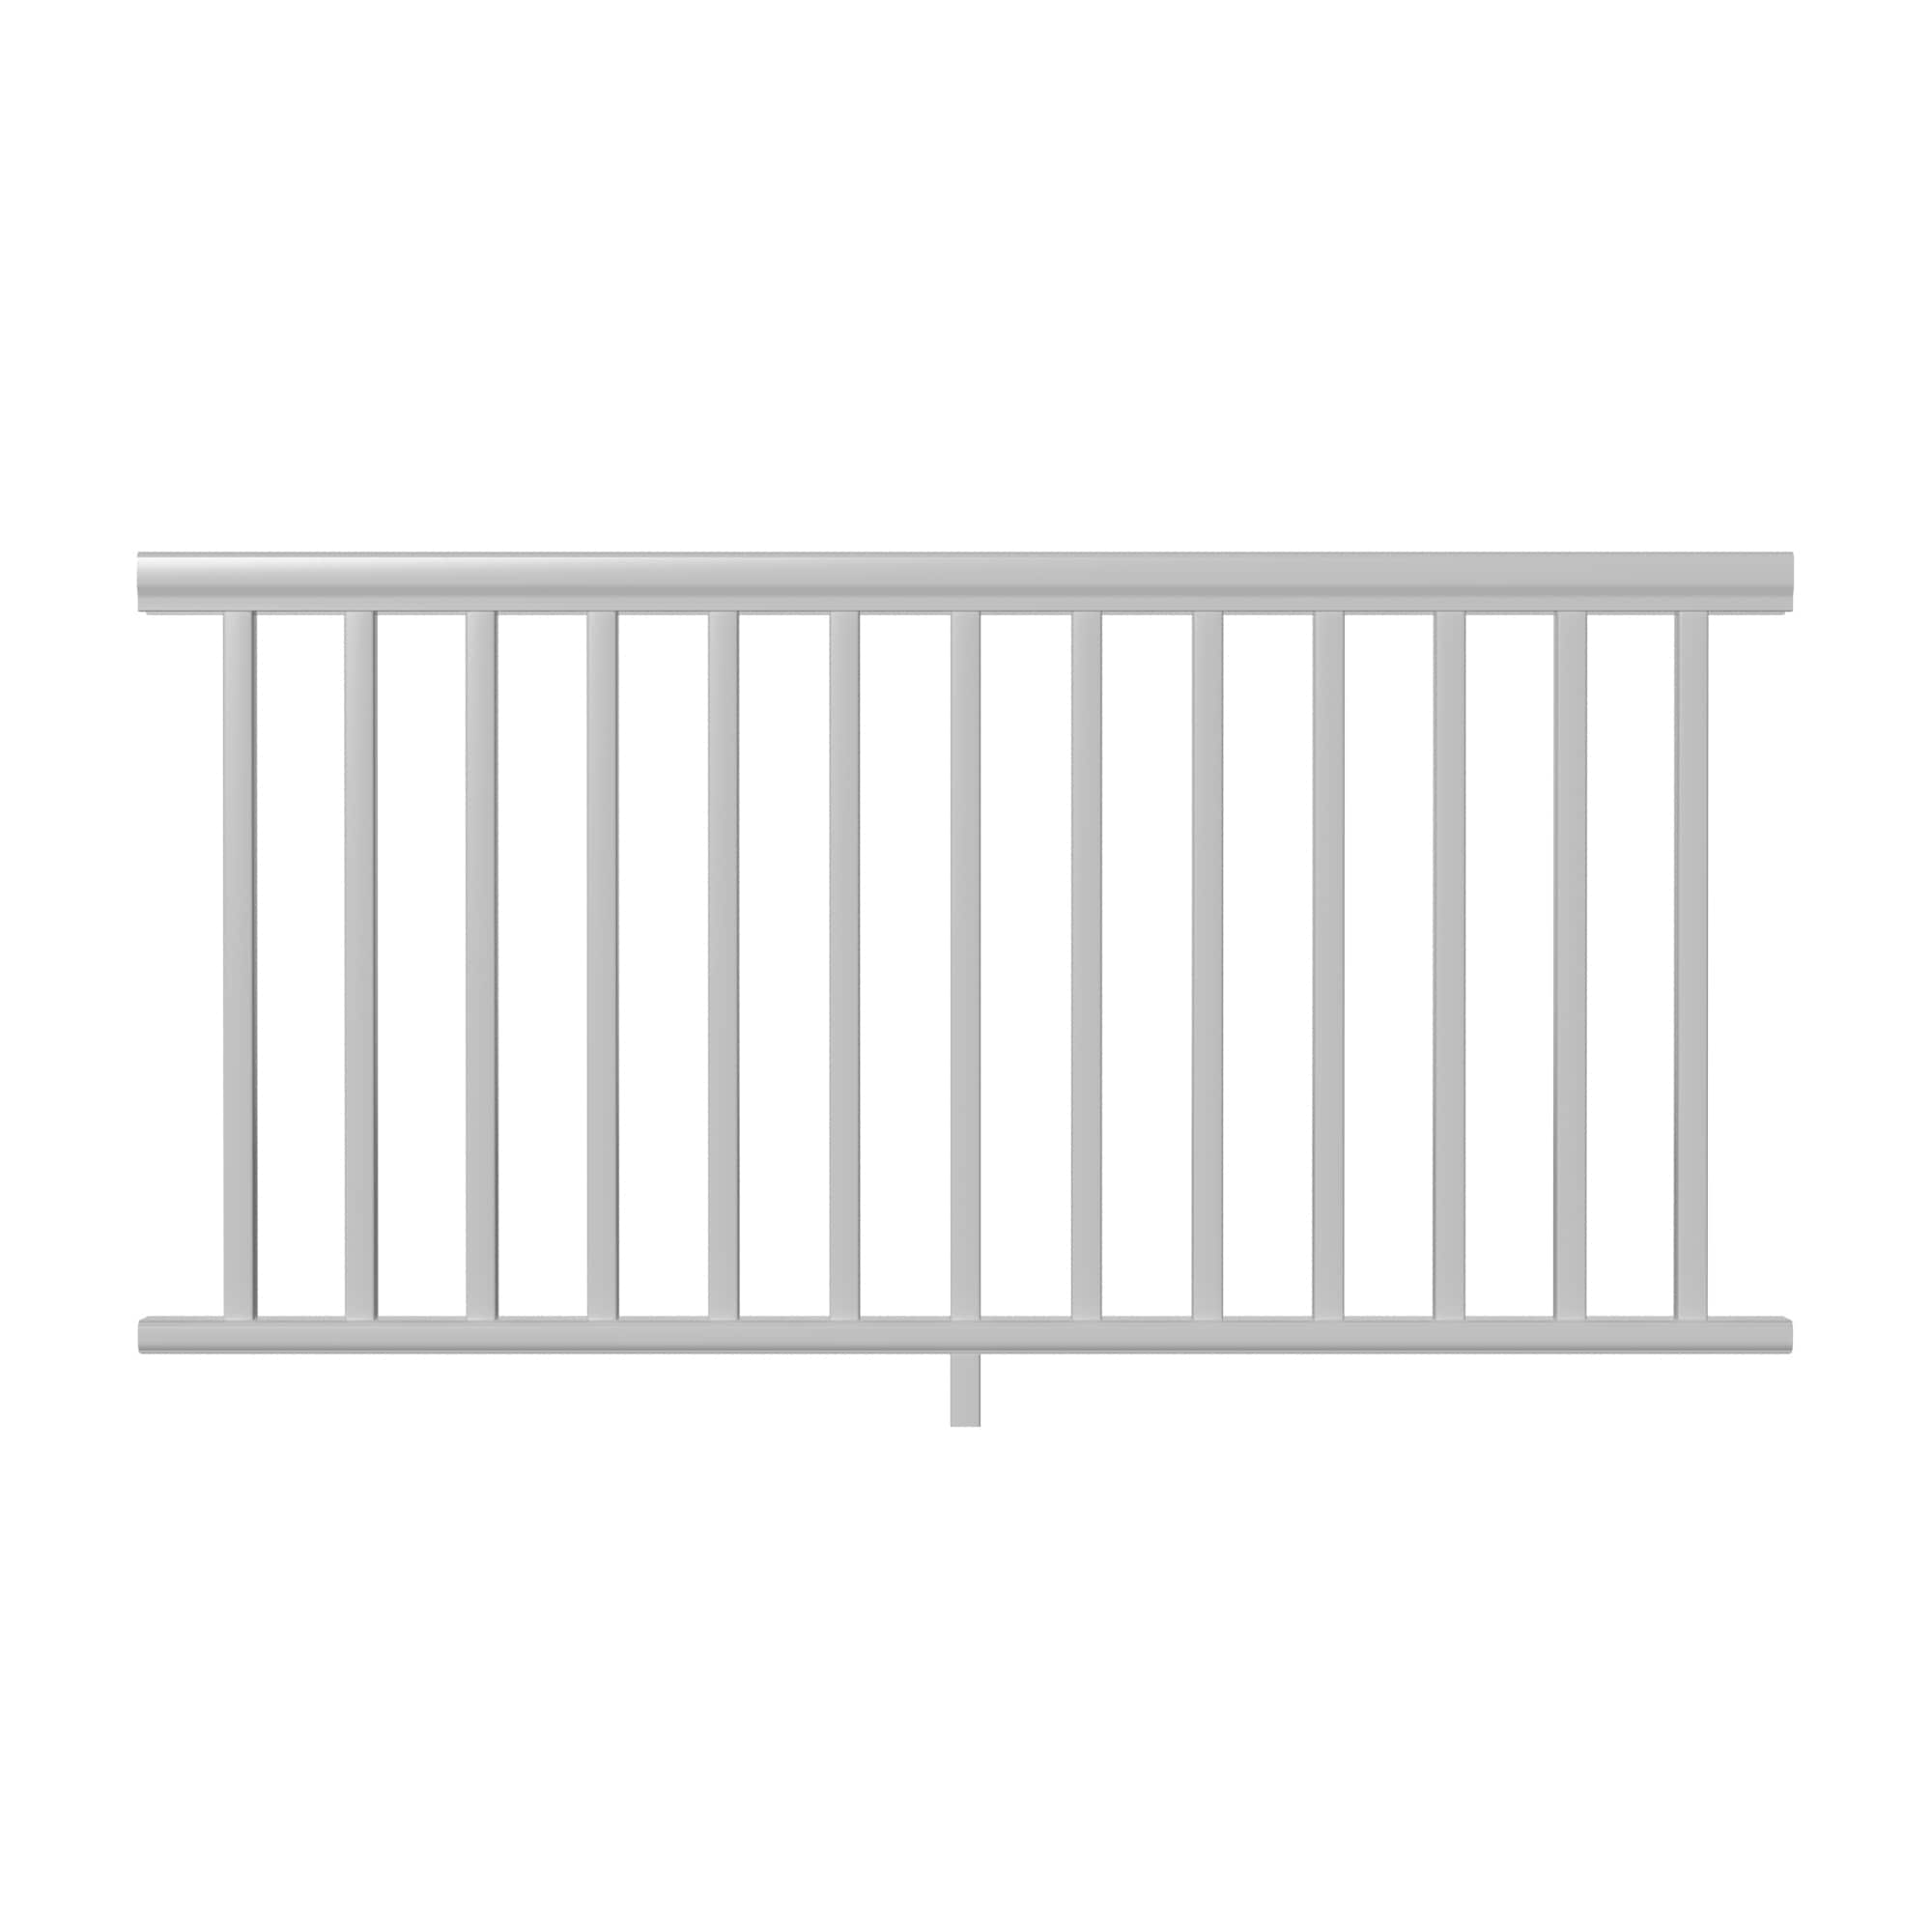 CityPost 12 ft. Black Deck Cable Railing CP-12-B-D - The Home Depot